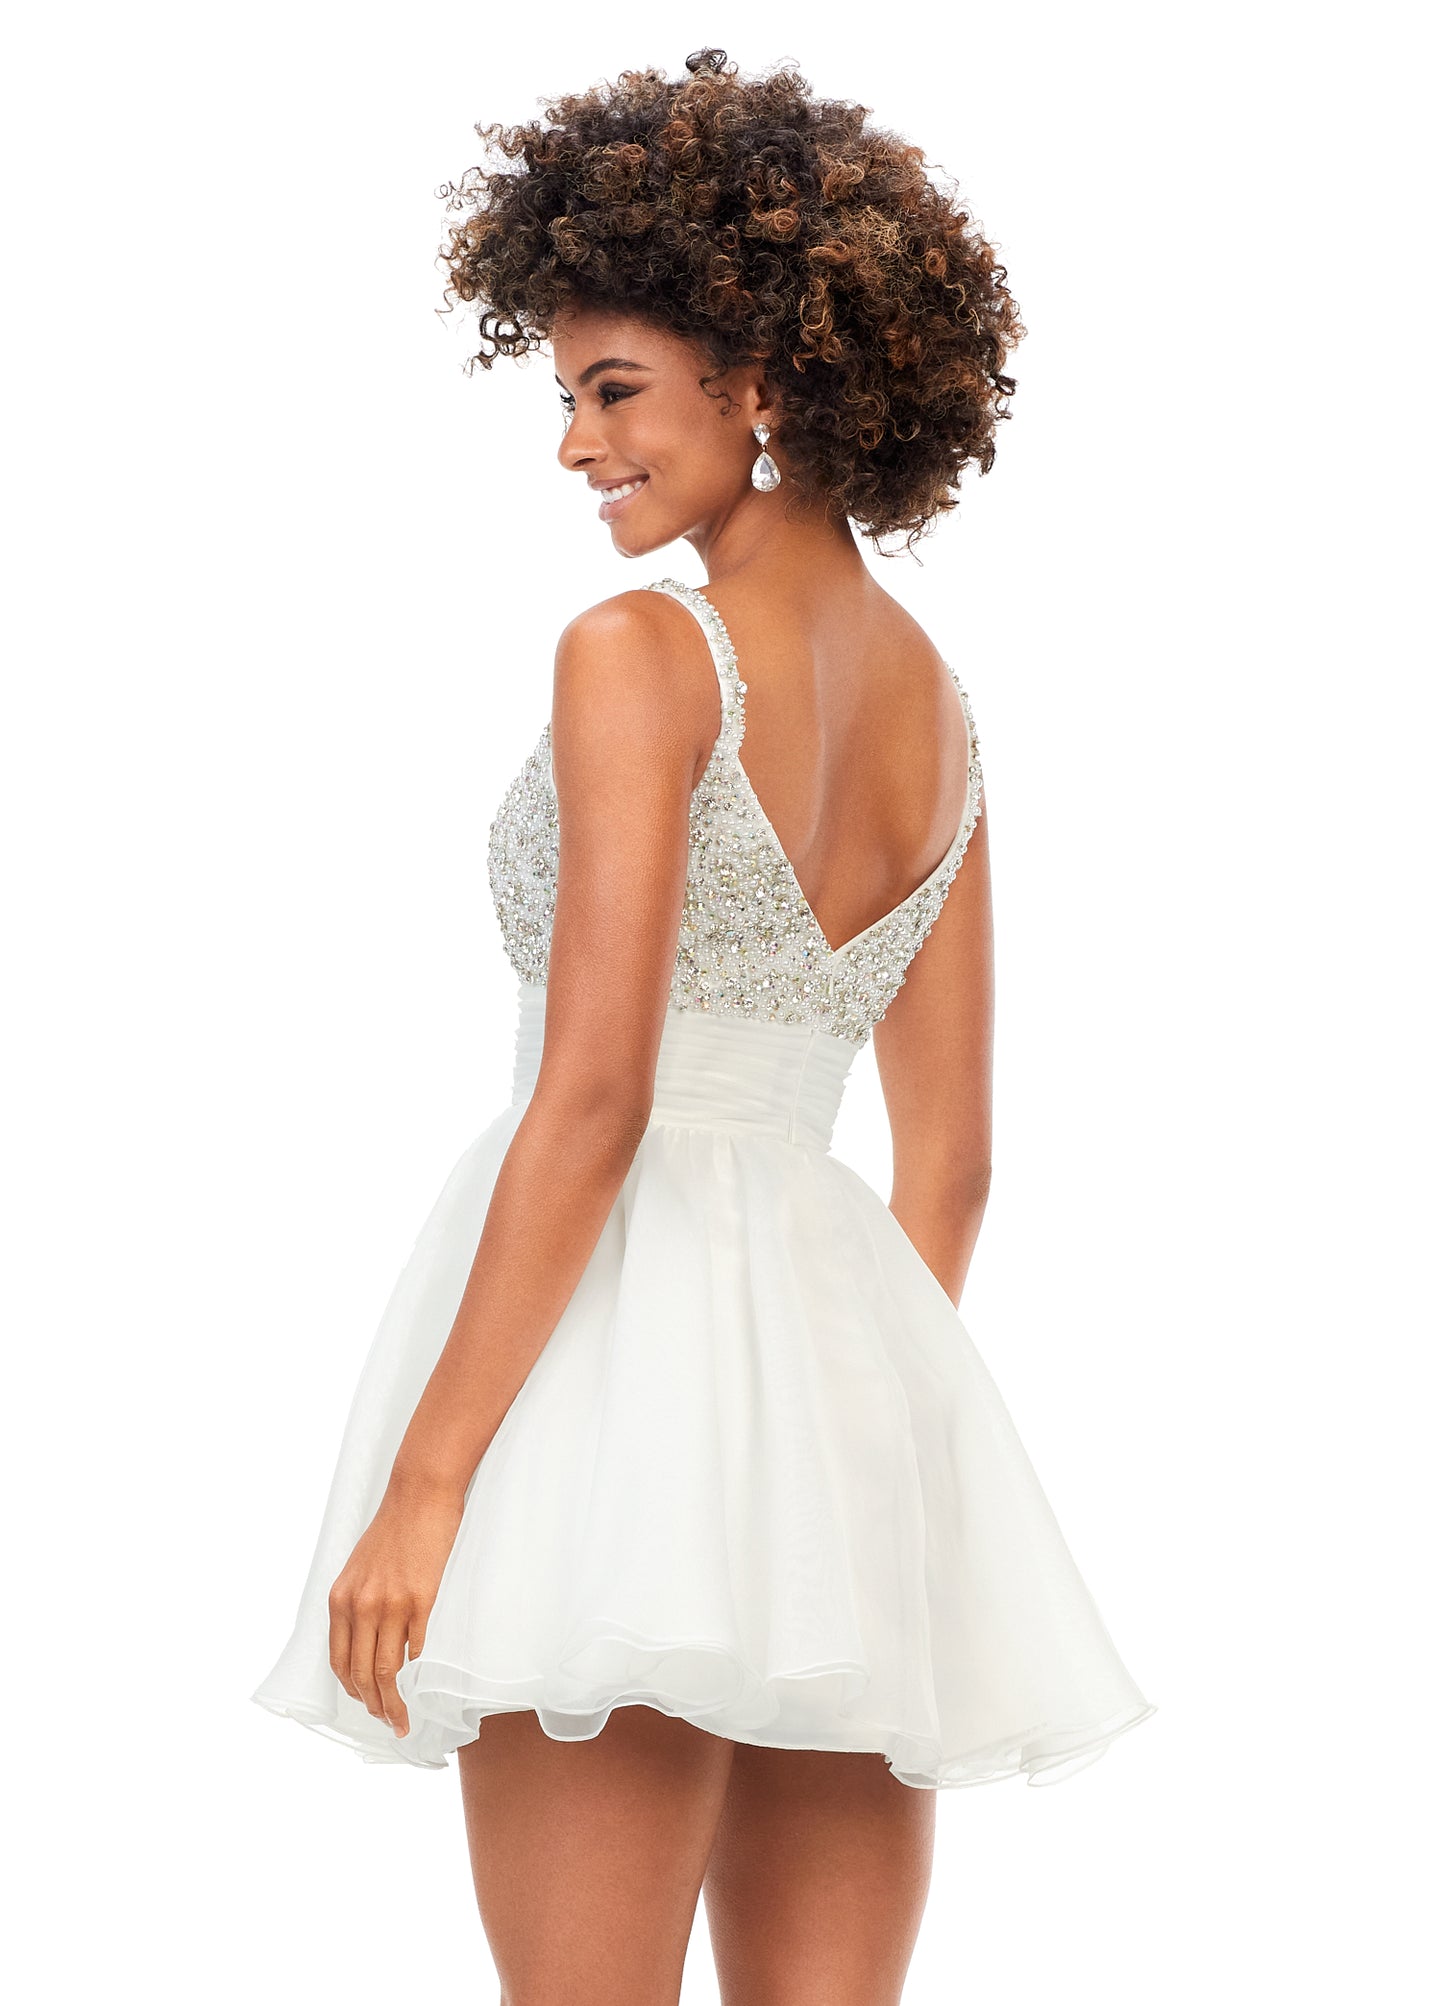 Ashley Lauren 4570 This sweet a-line cocktail gown features a fully beaded bustier and a ruched waist detail. Fully Beaded Bustier A-Line Skirt Ruched Waist Organza COLORS: Sky, Pink, Ivory